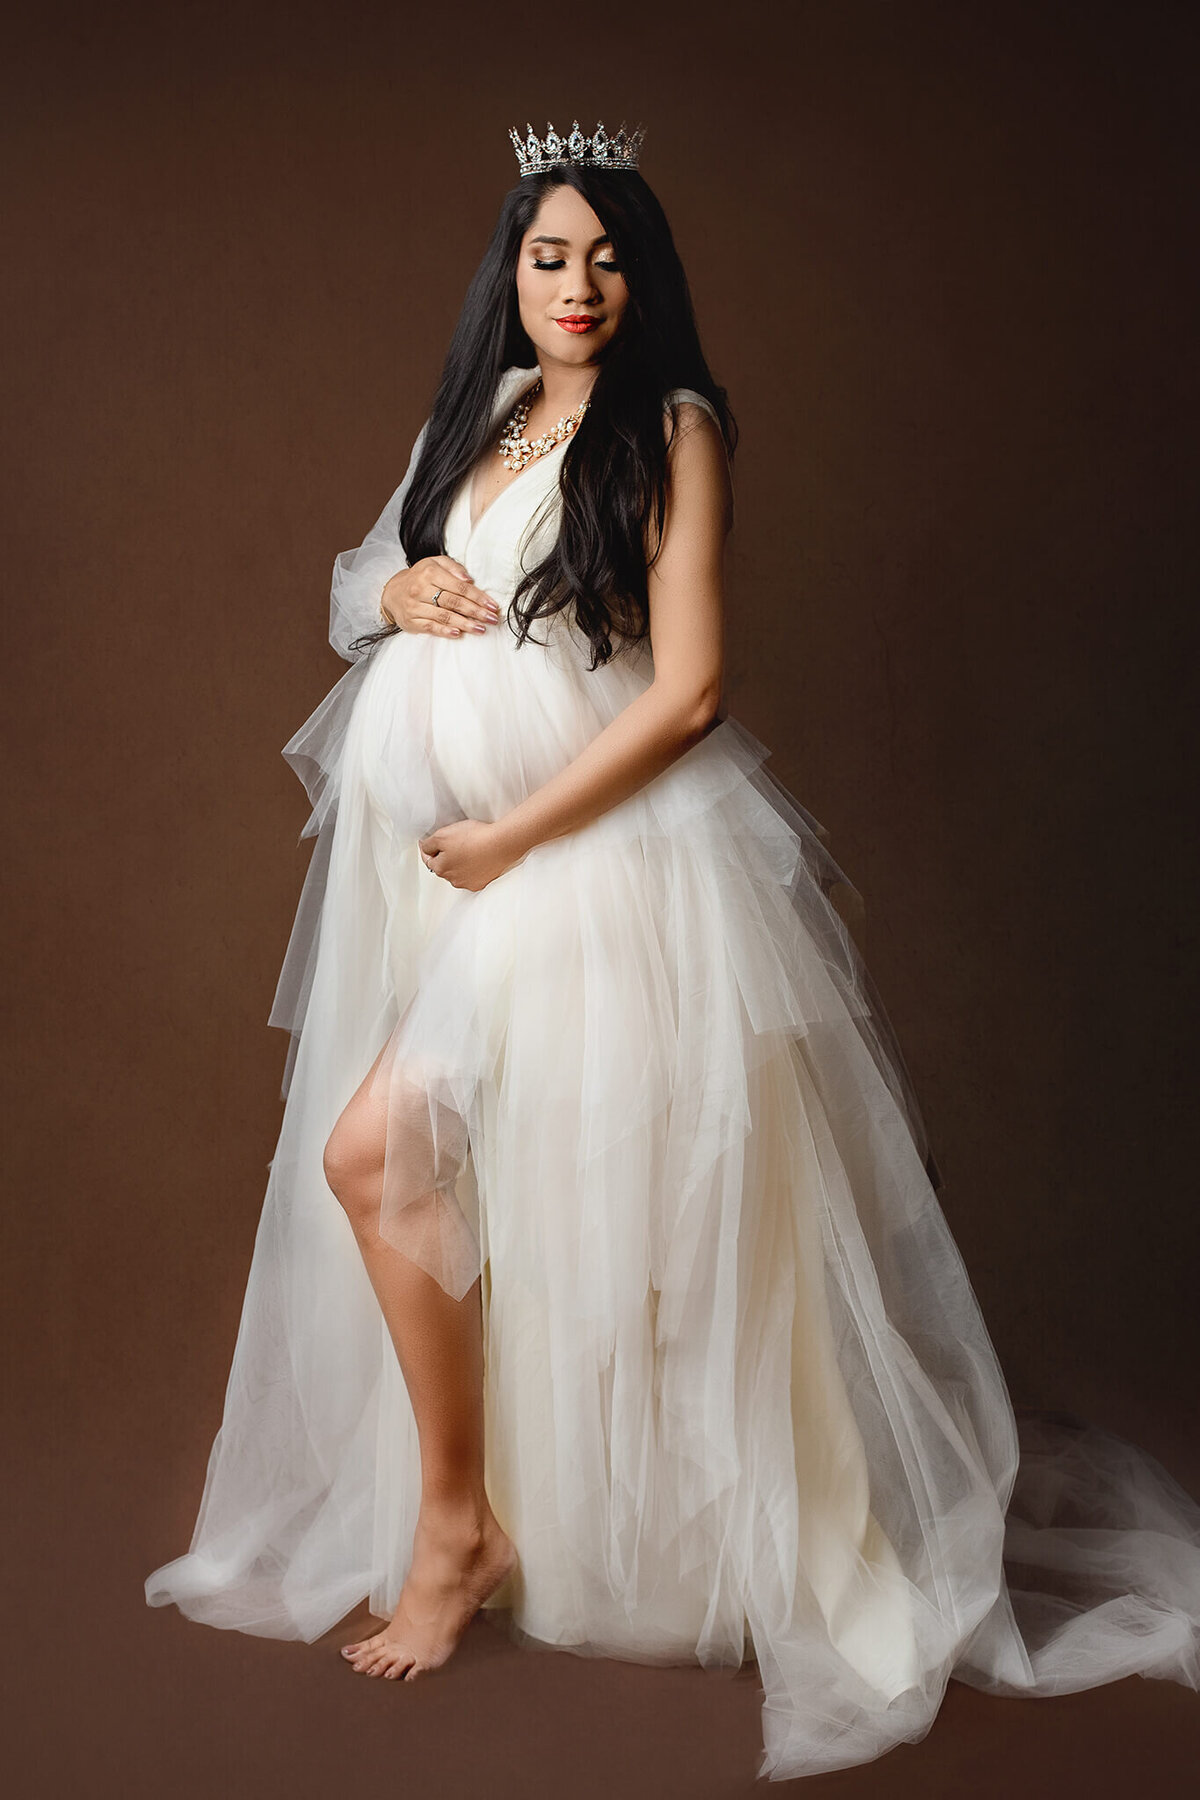 expecting mother wears a crown and beautiful cream tulle dress for her maternity shoot in Hamilton, ON